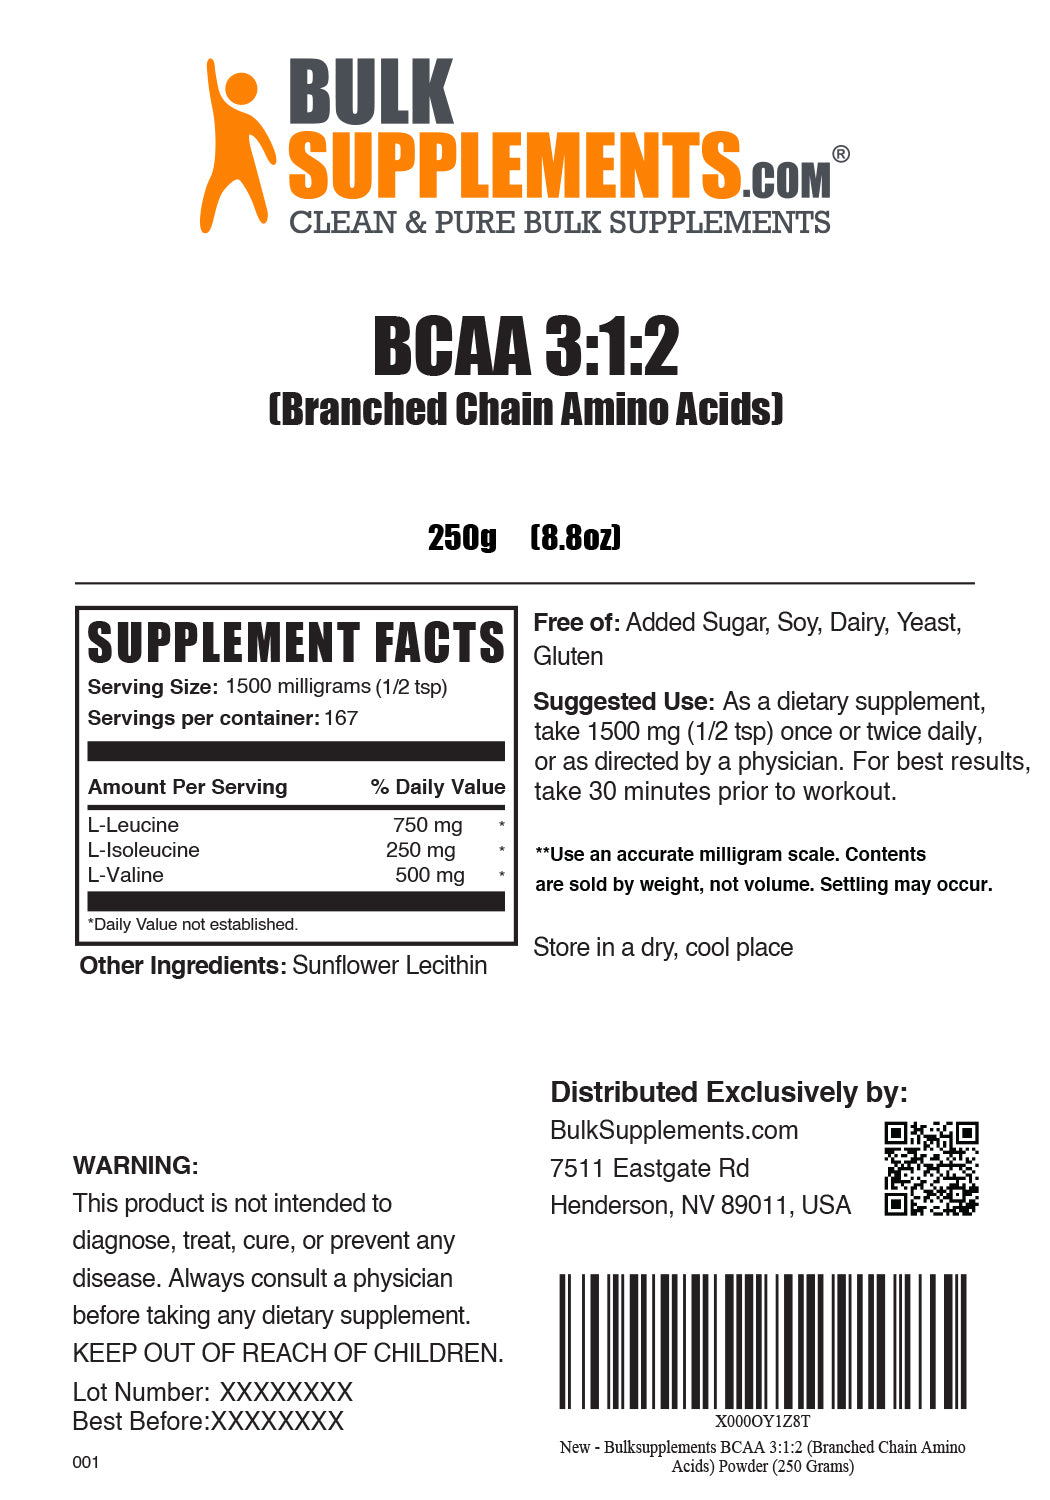 BCAA 312 Powder Supplement Facts and Serving Size for 250g Bag